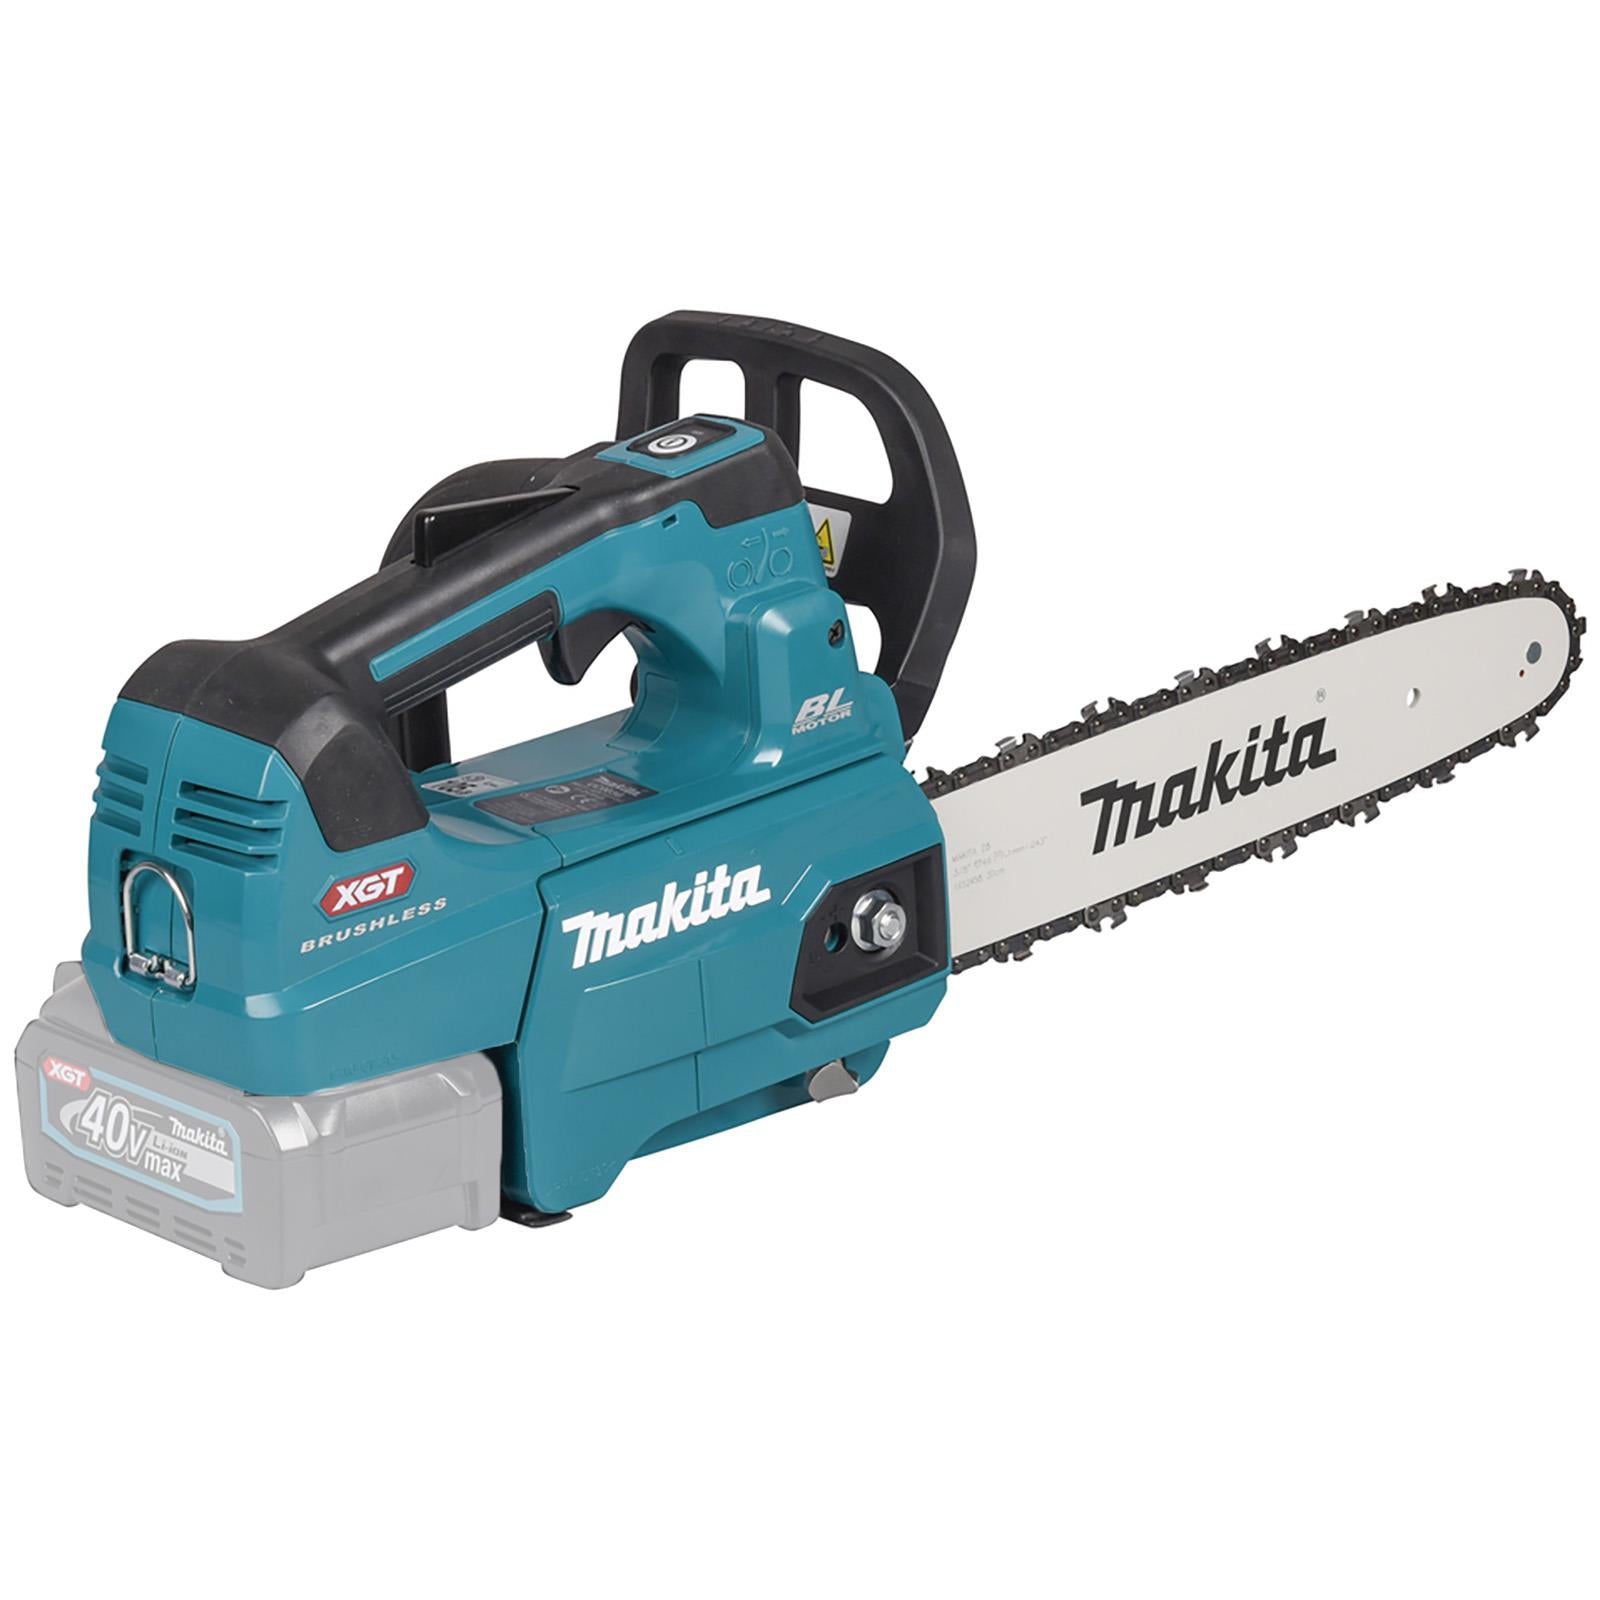 Makita Chainsaw 30cm 12" 40V XGT Brushless Cordless Top Handle Garden Tree Cutting Pruning Bare Unit Body Only UC003GZ